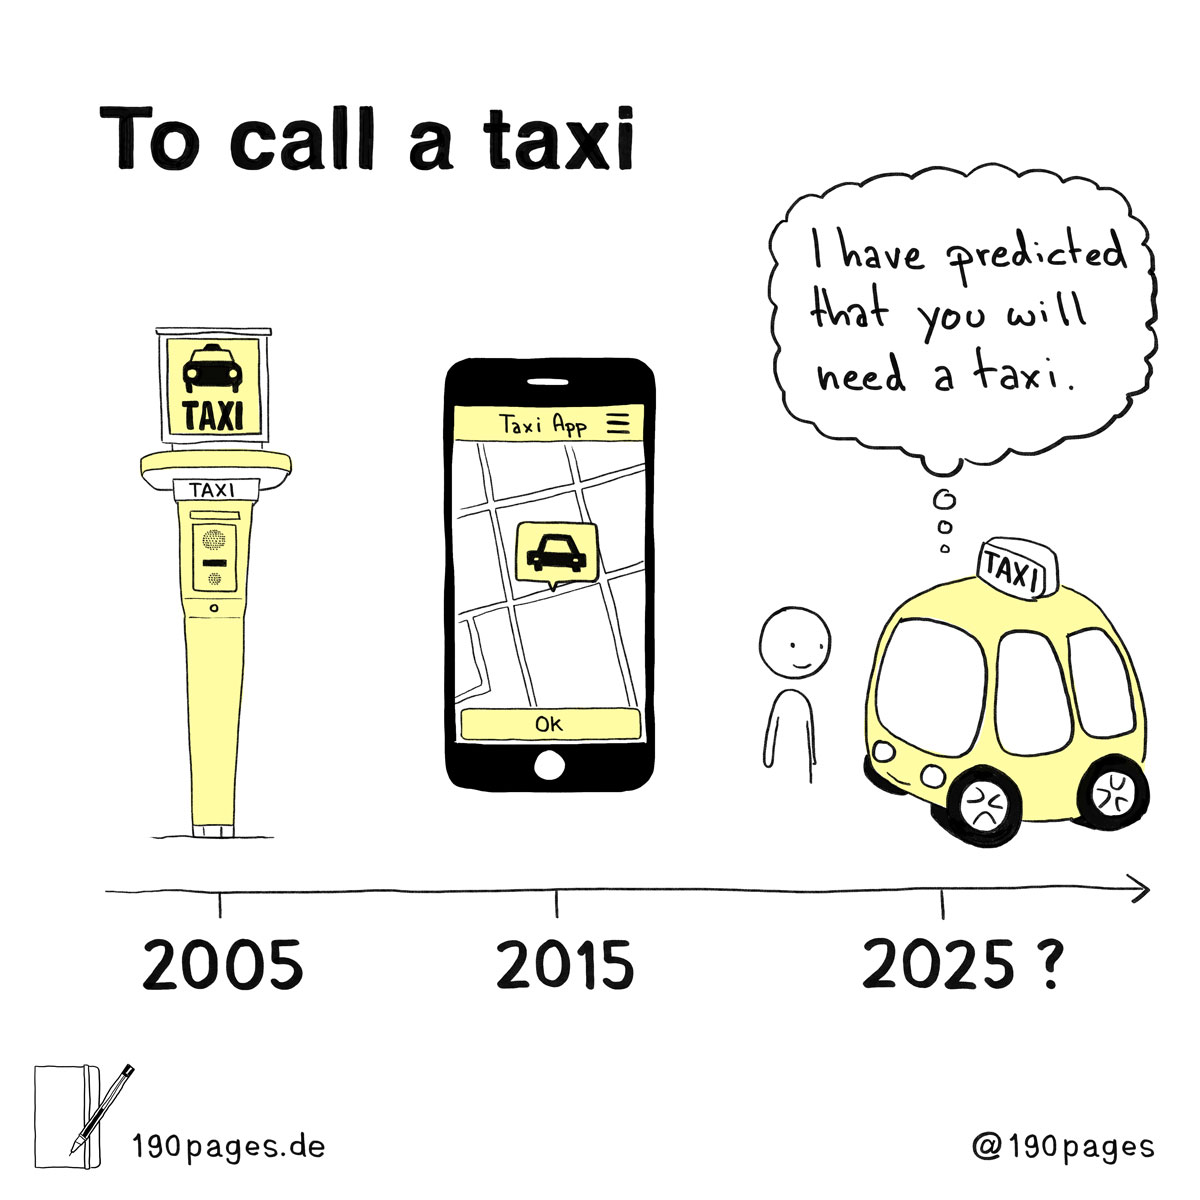 Sebastian Frederick Müller, Zebastian, 190 pages: ta call a taxi, mobility, prediction